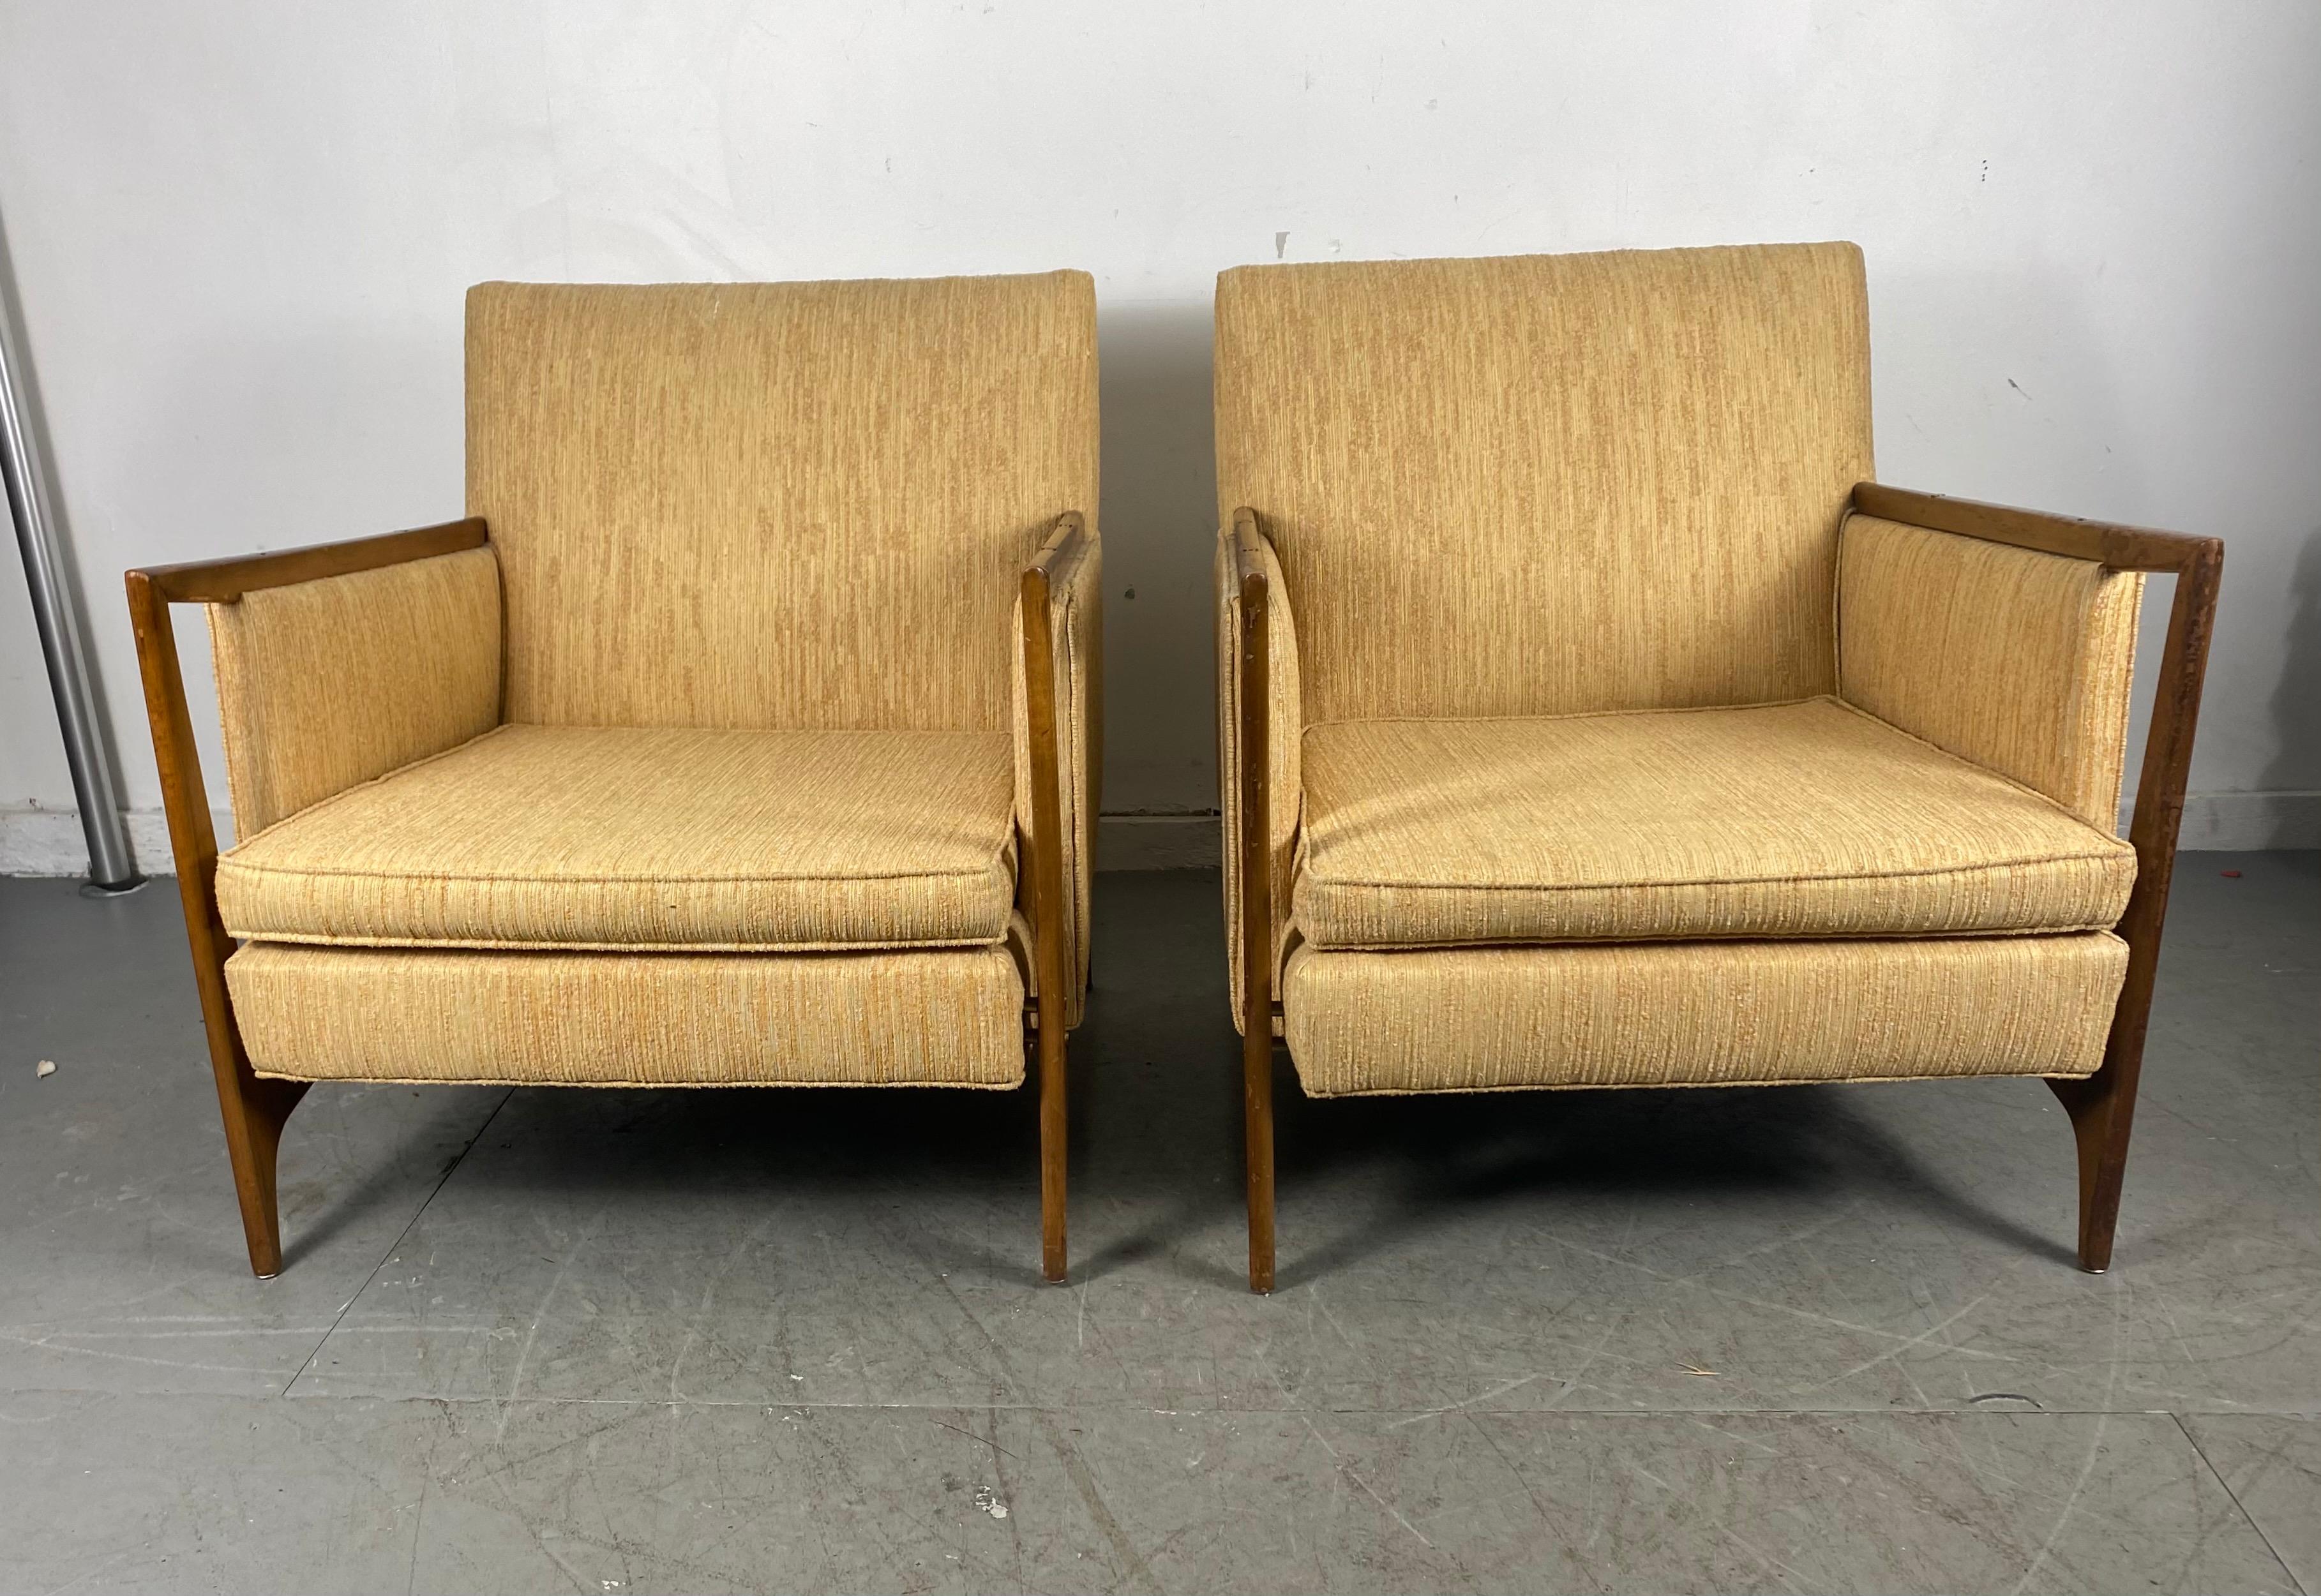 Stunning pair of Mid-Century Modernist lounge chairs attributed to Dux of Sweden. Superior quality and construction, extremely comfortable, amazing design and proportions. Retain original fabric in good condition. Wood frames in need of restoration,